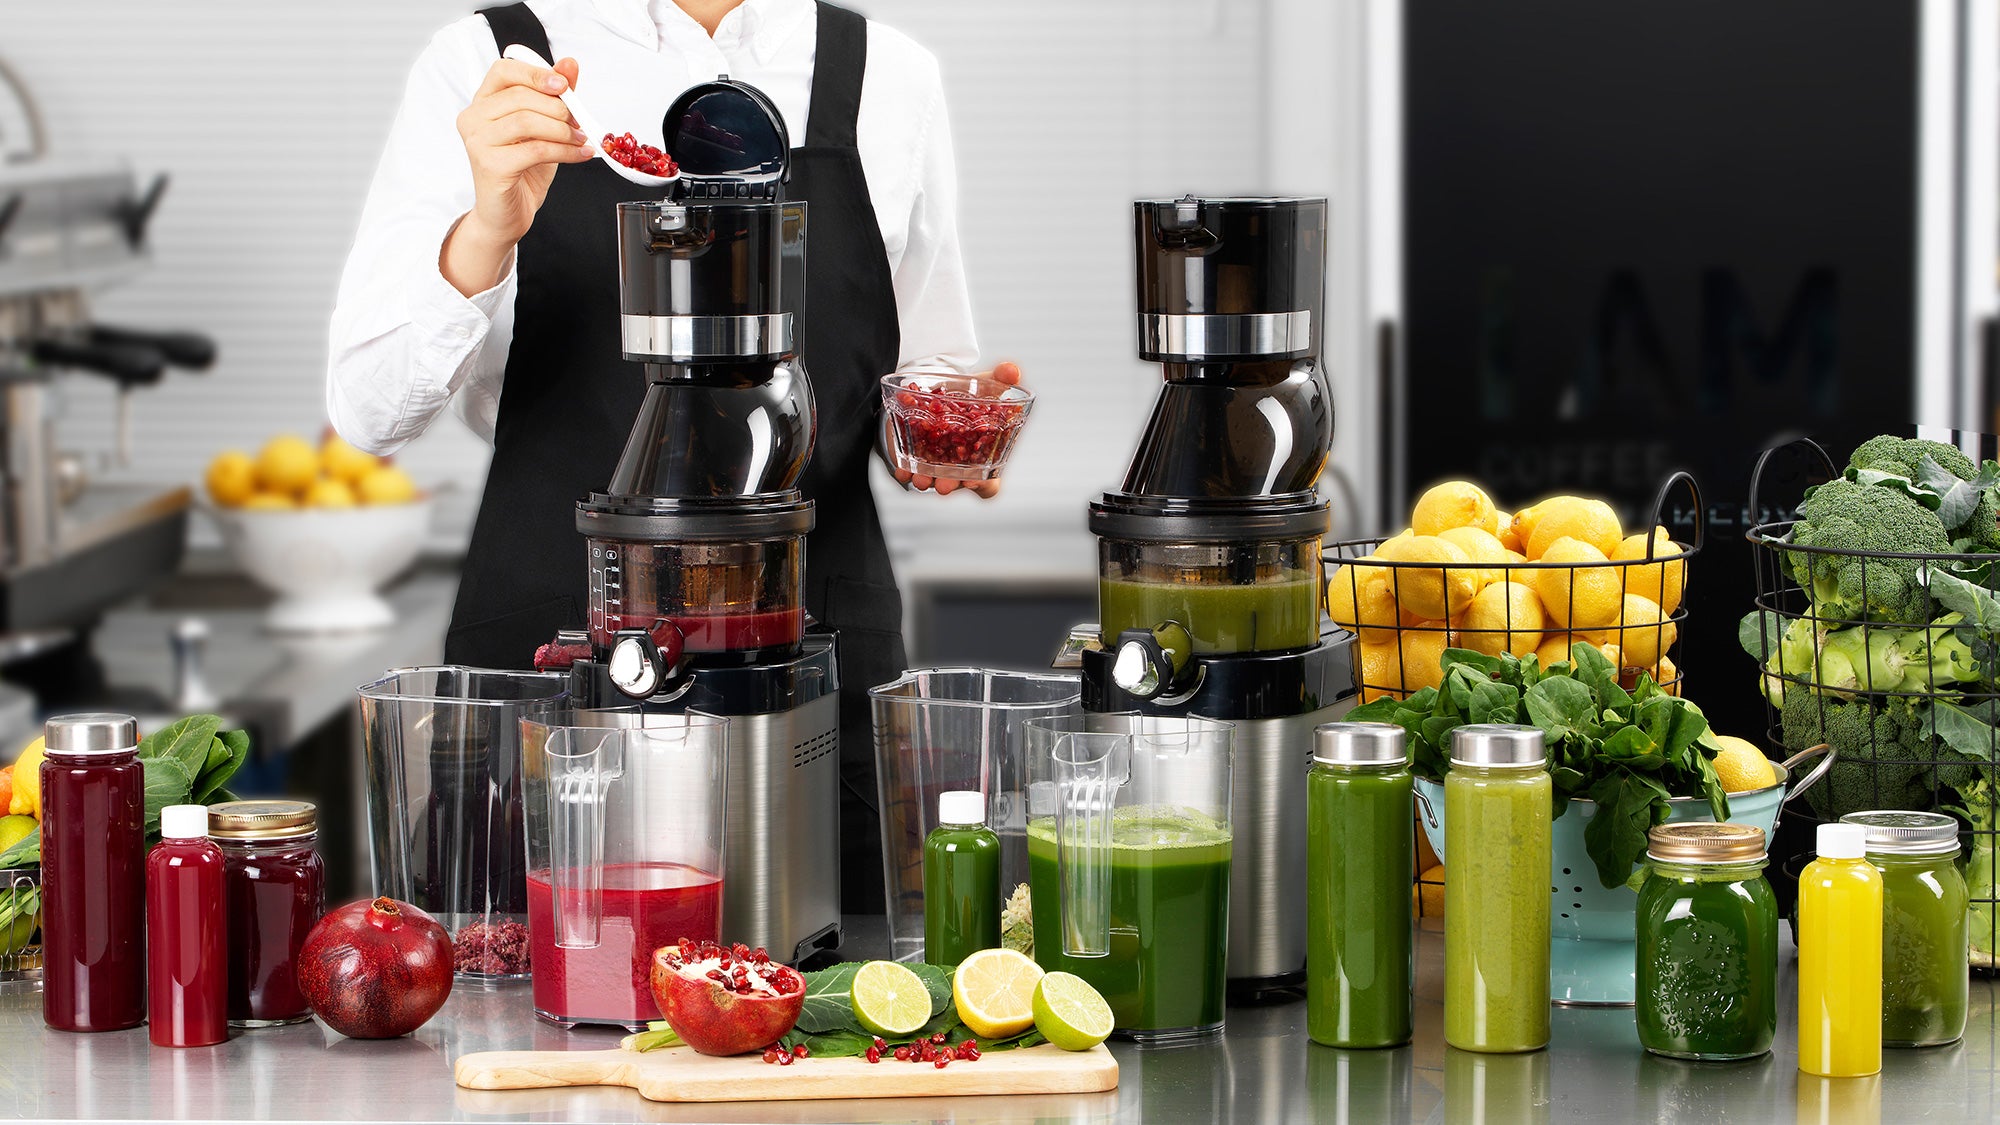 Kuvings whole slow juicer chef in juice bar setting